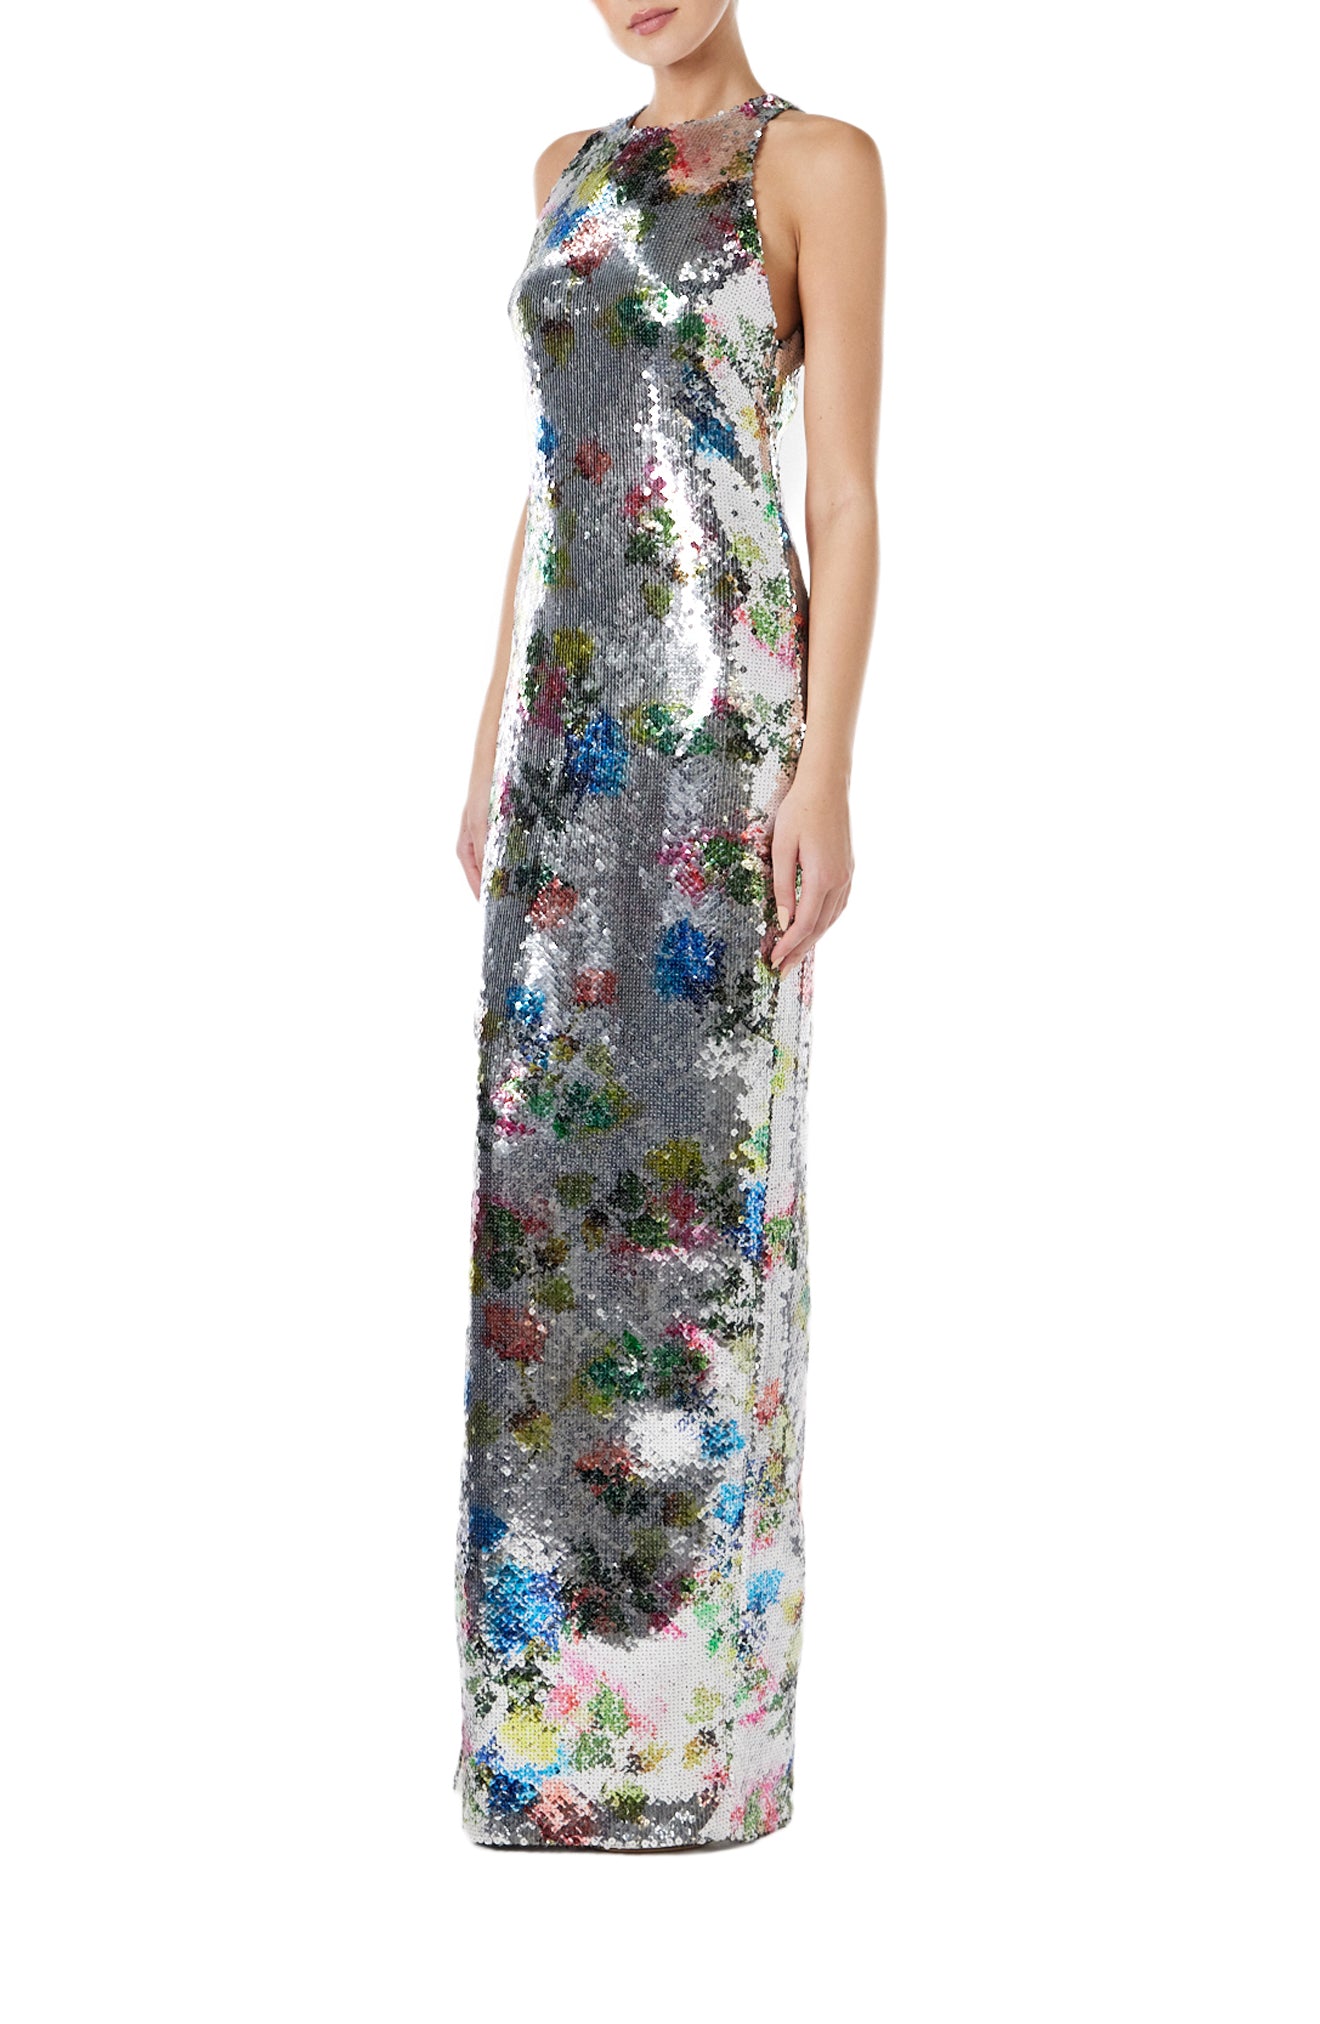 Monique Lhuillier Spring 2024 printed silver sequin colum gown with sleeveless, cut-away neckline - left side.